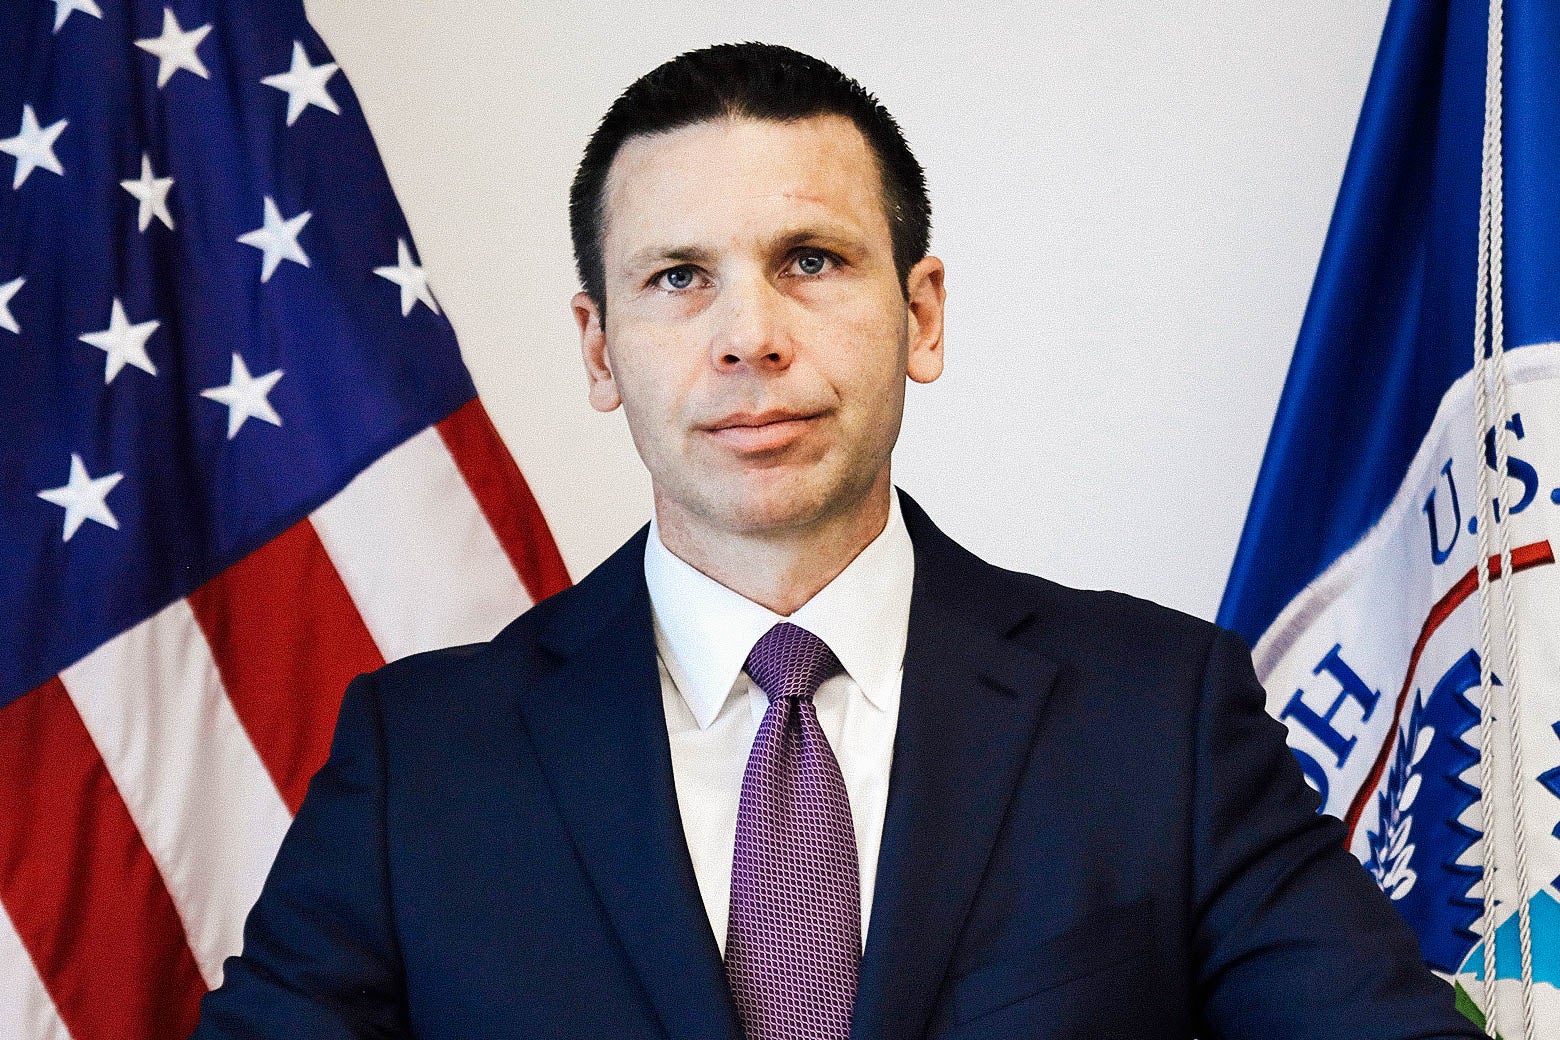 Kevin McAleenan listens to questions from DHS personnel at One World Trade Center on Monday in New York City.